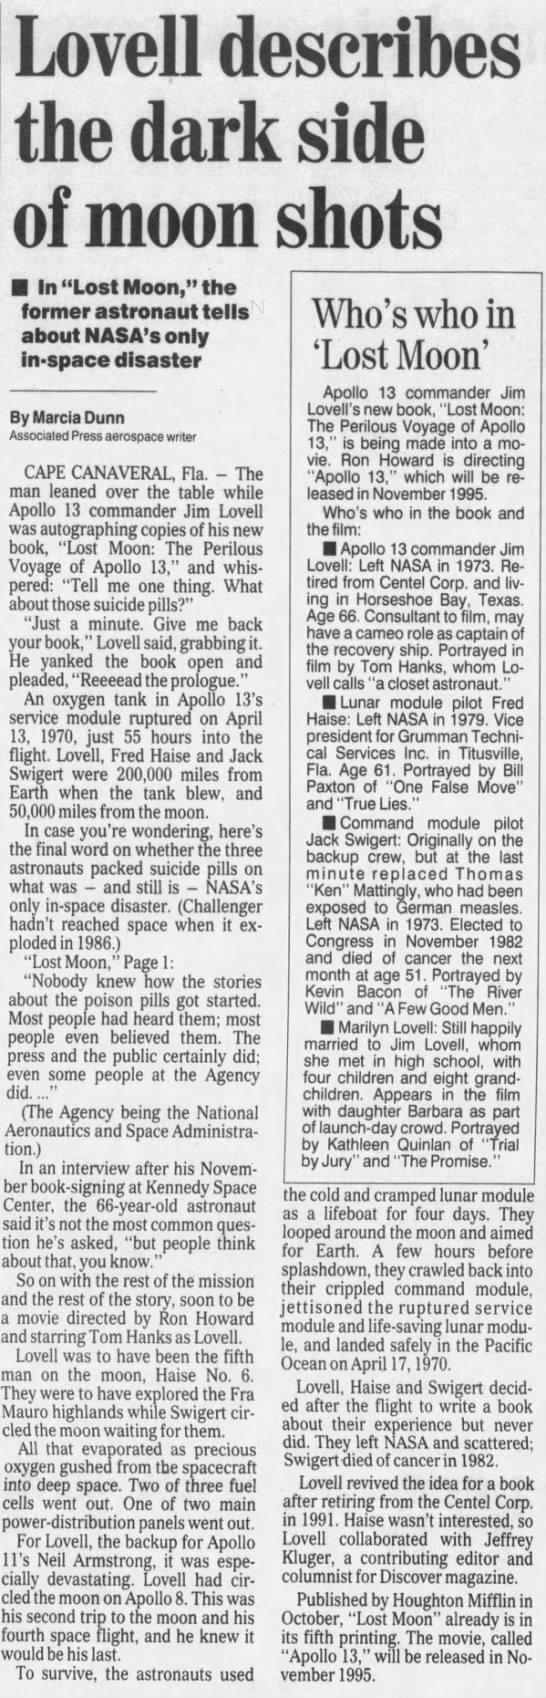 The Post-Crescent, 11 December 1994, page F-8 - 